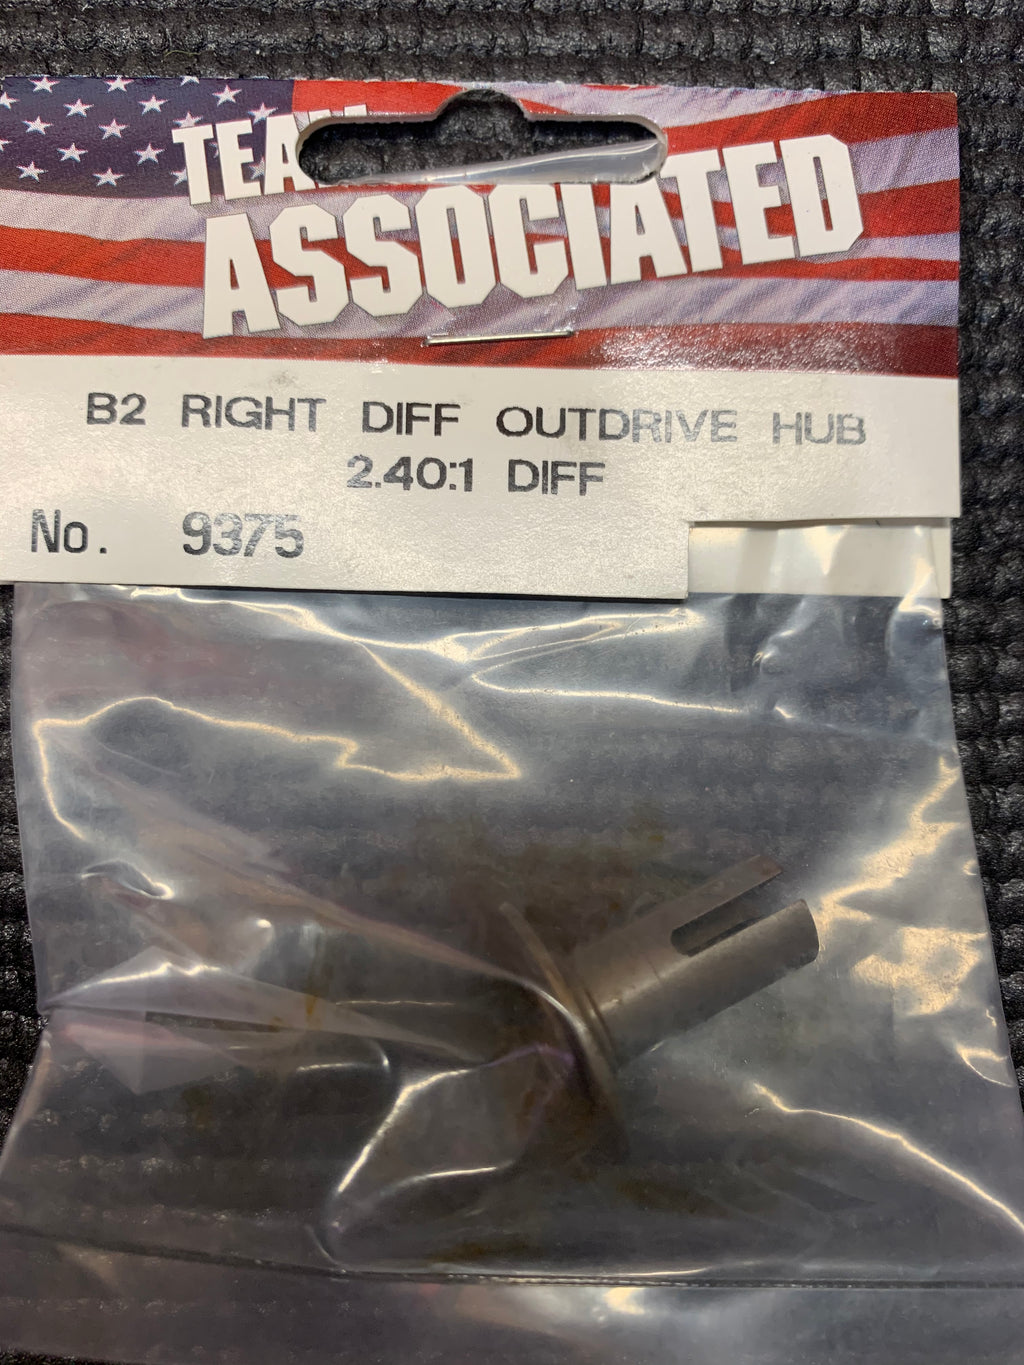 TEAM ASSOCIATED B2 RIGHT DIFF OUTDRIVE 2.40.1